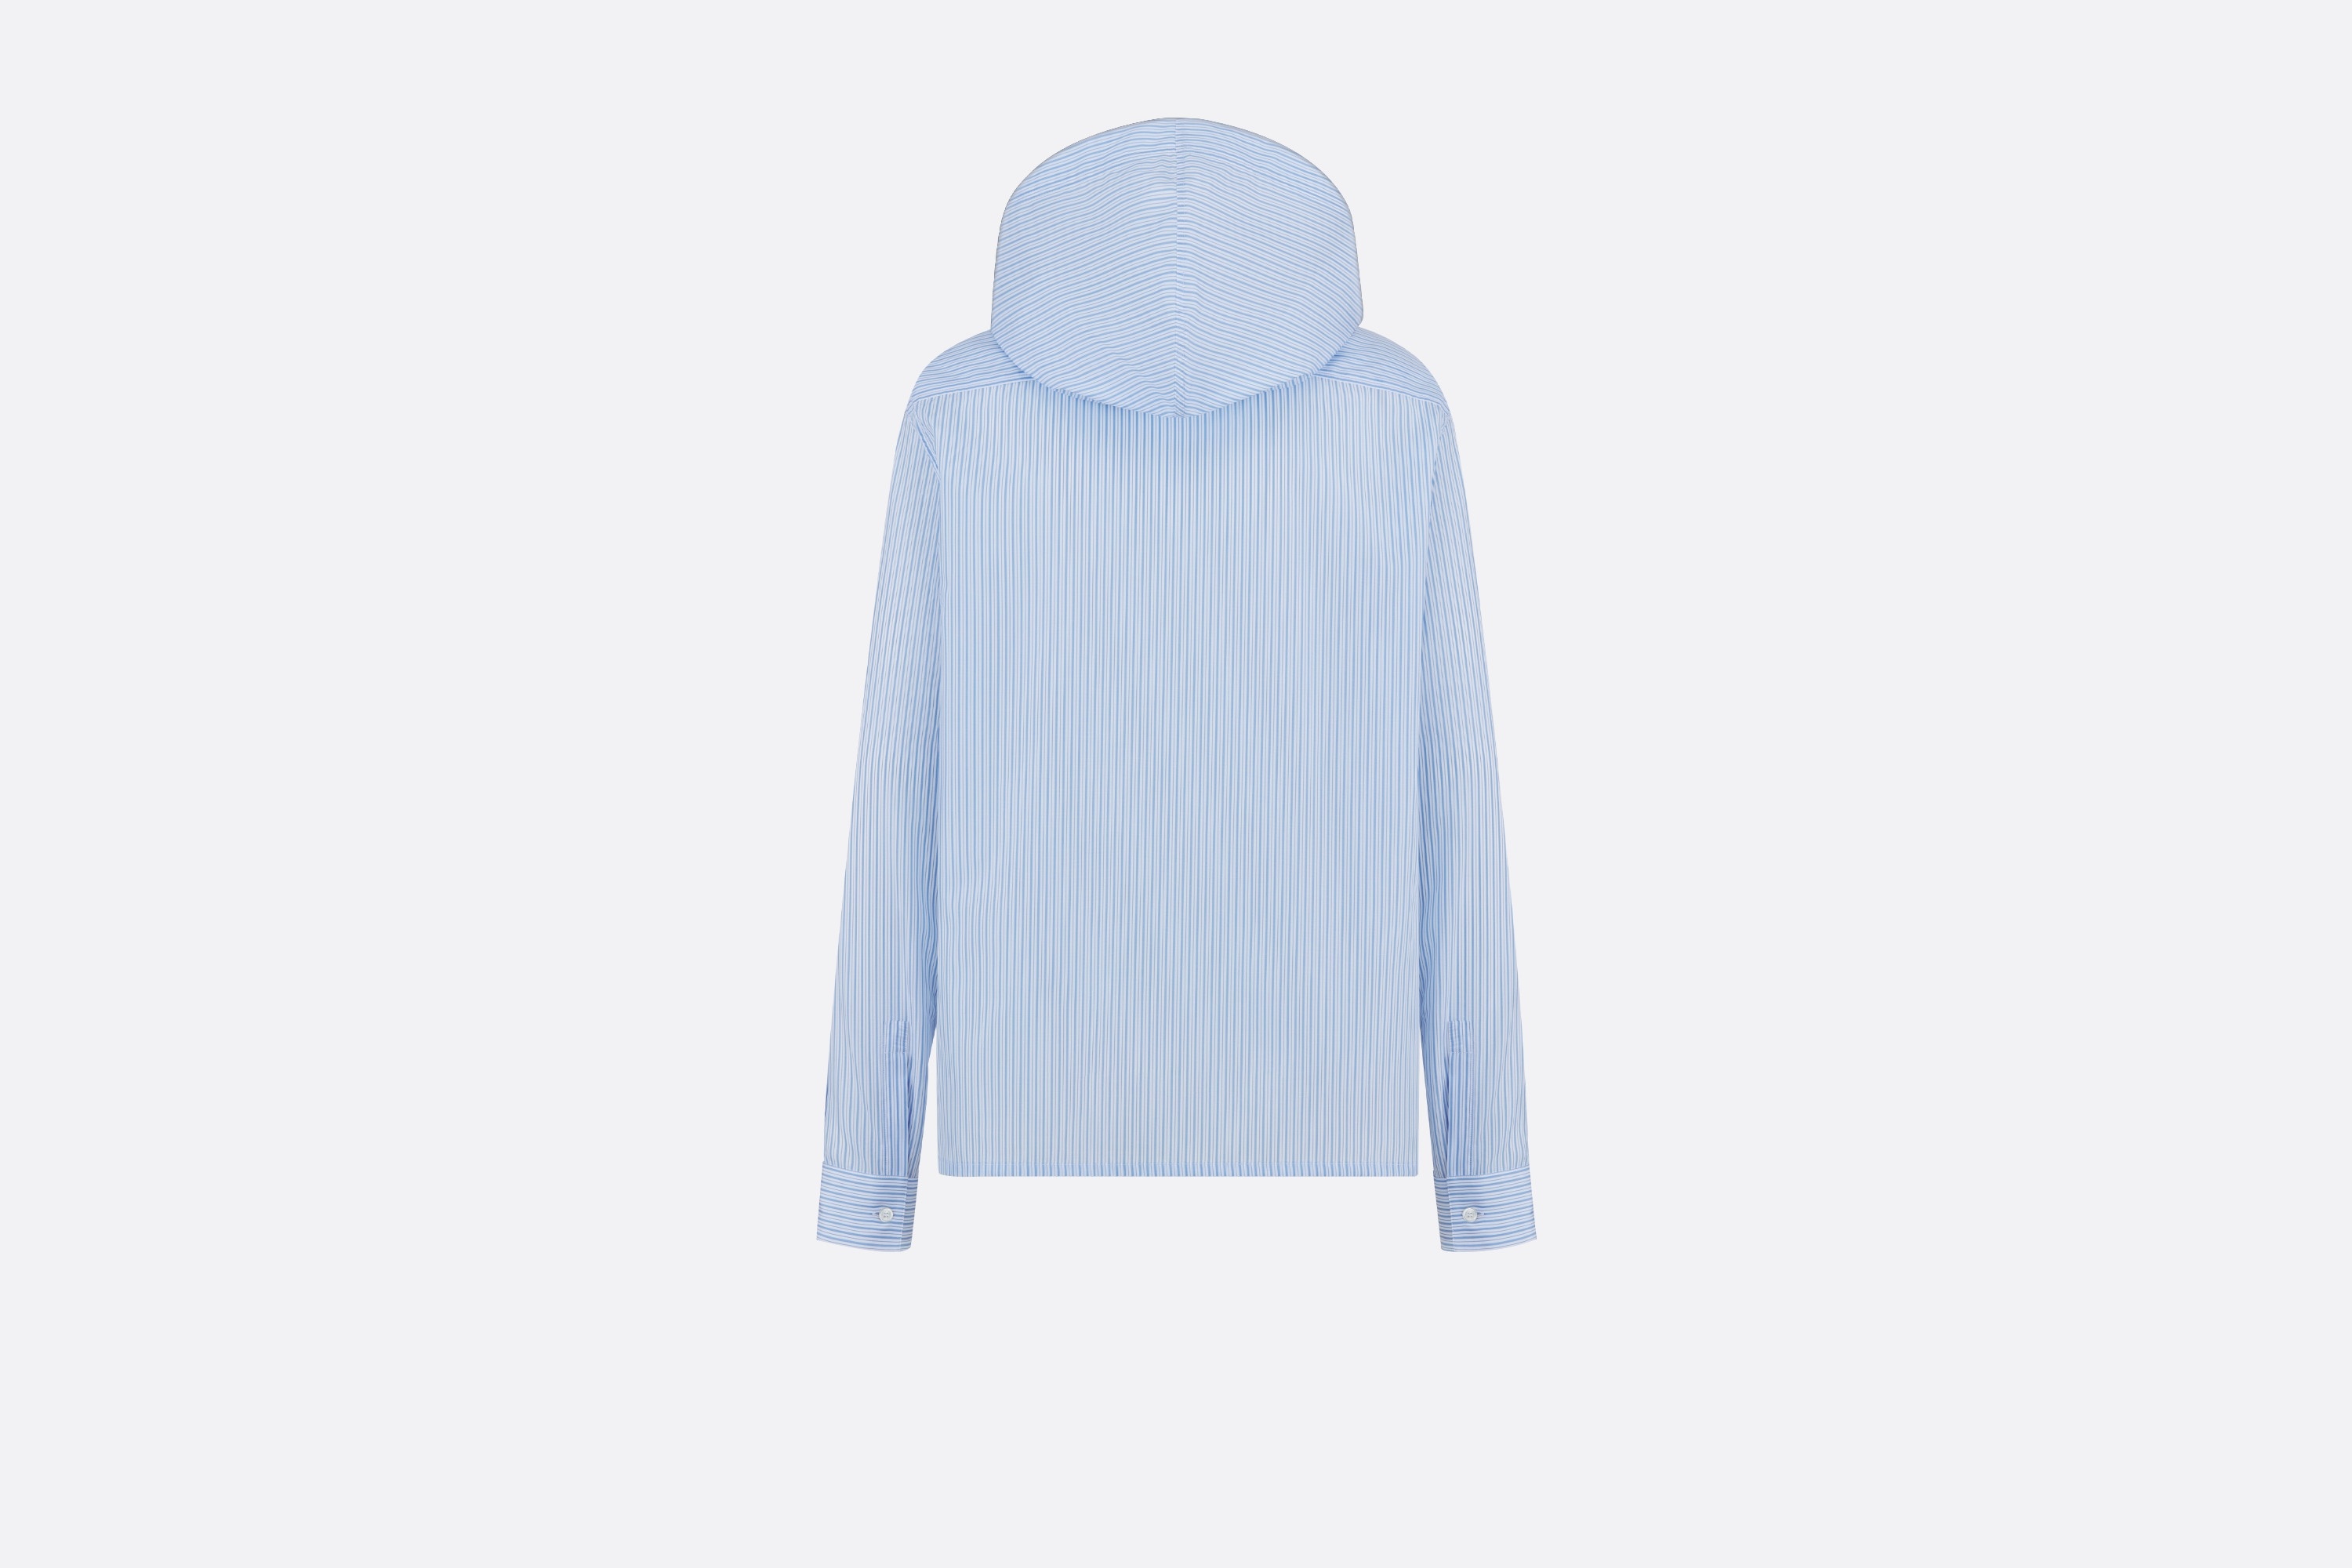 Christian Dior Couture Hooded Shirt - 2